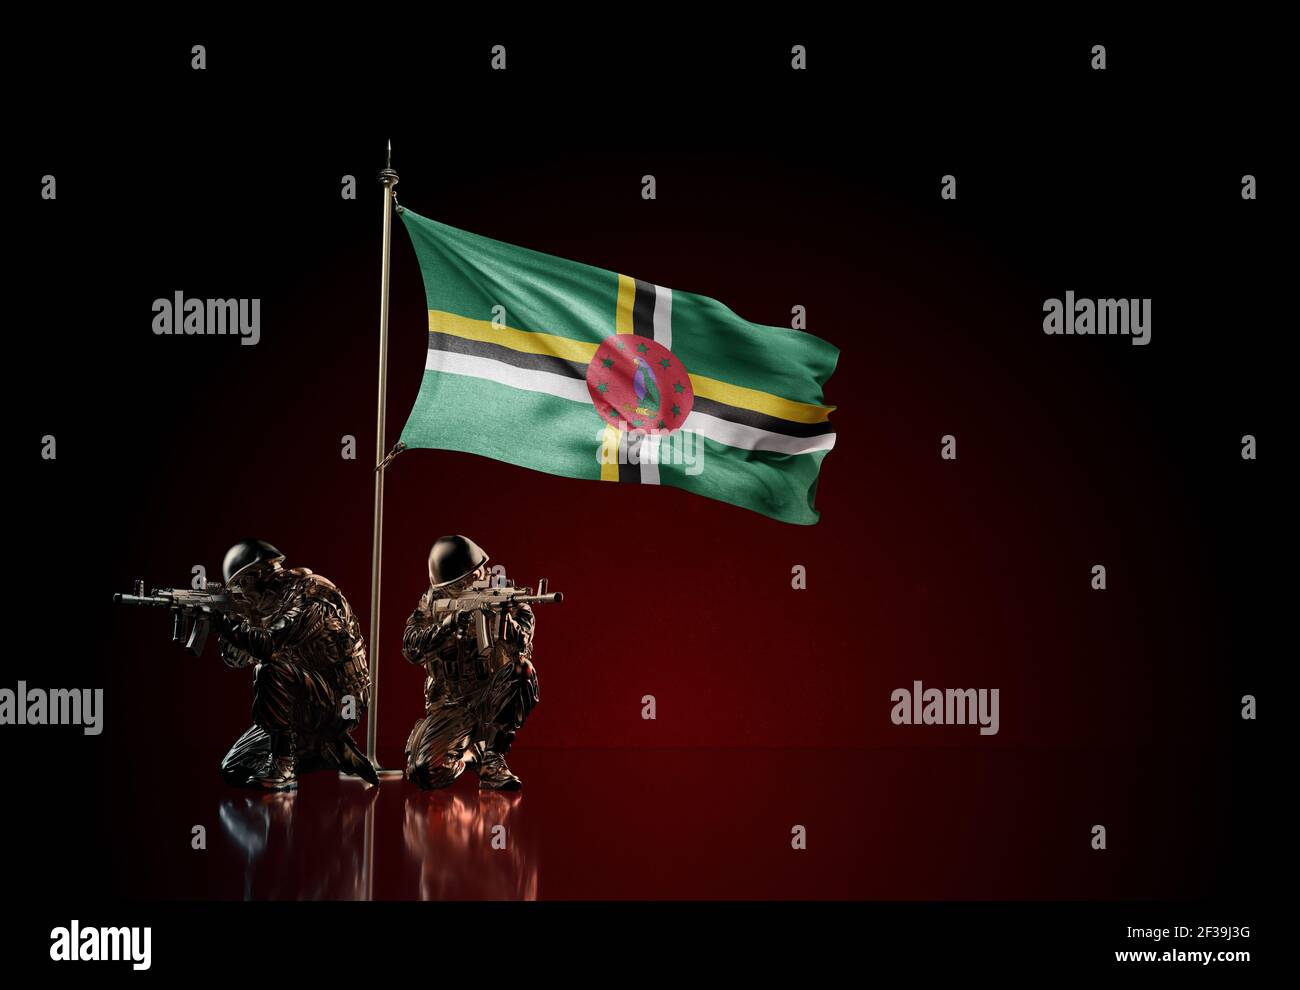 Concept of military conflict with soldier statues and waving national flag of Dominica. Illustration of coup idea. Two guards defending the symbol Stock Photo